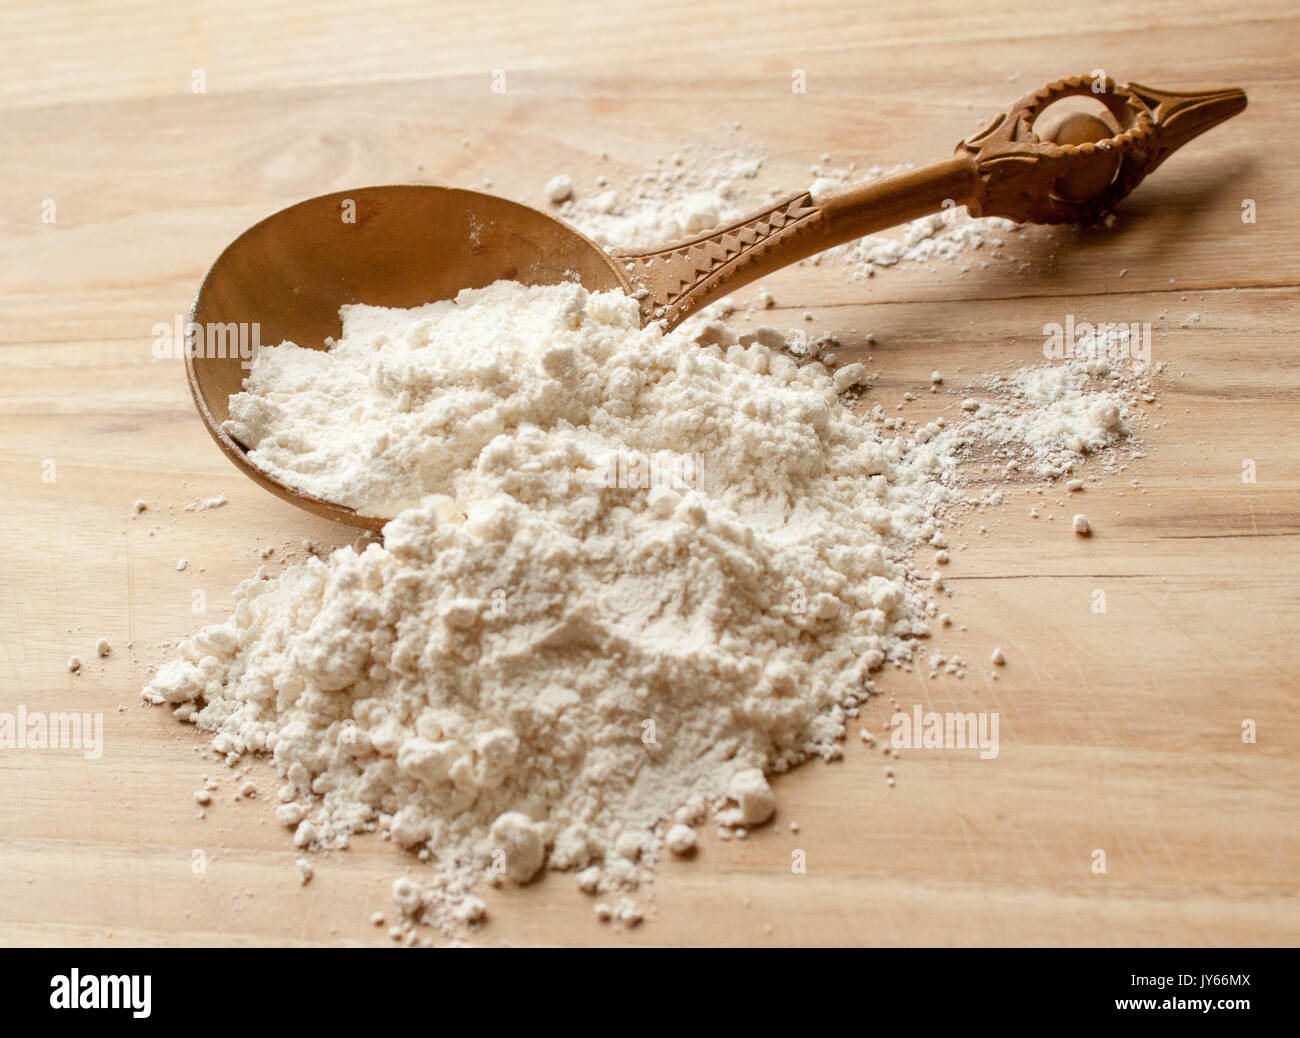 old carved wood spoon with wheat flour on the kitchen table Stock Photo